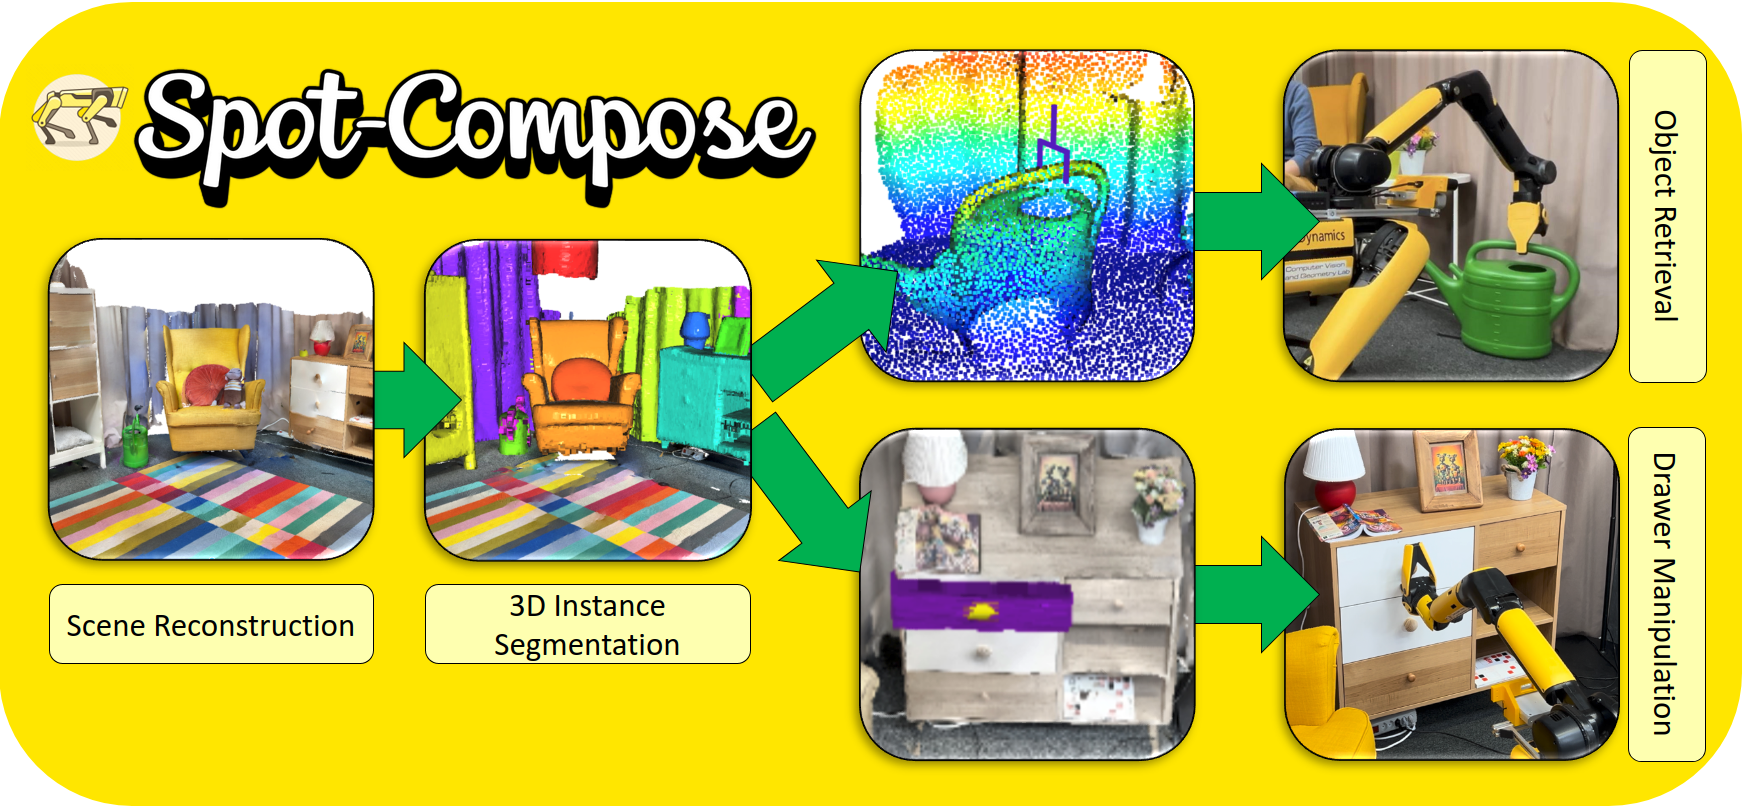 Spot-Compose: A Framework for Open-Vocabulary Object Retrieval and Drawer Manipulation in Point Clouds